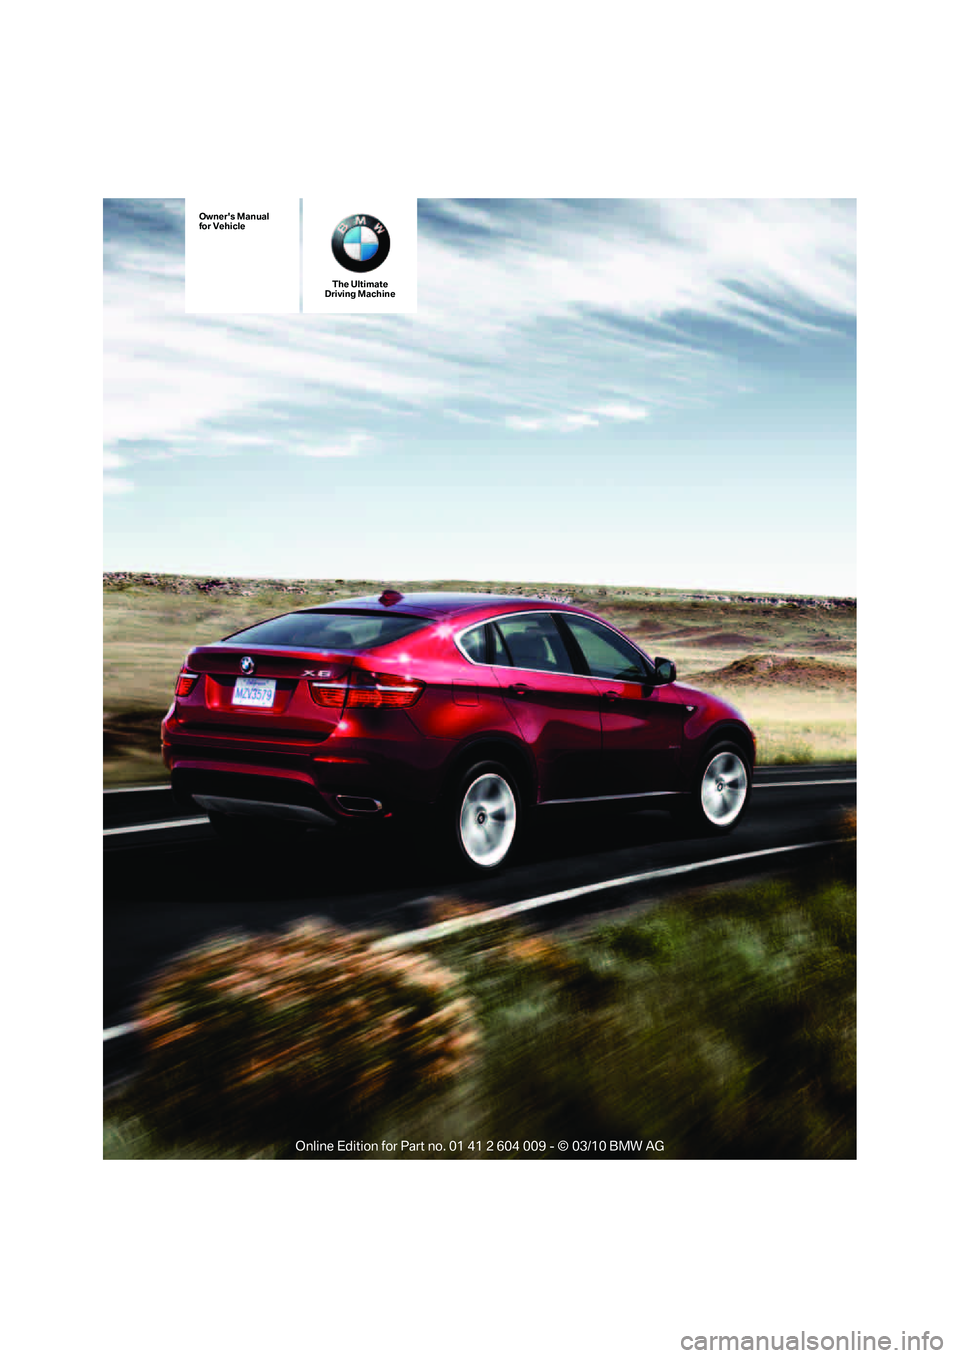 BMW X5 XDRIVE 35I SPORT ACTIVITY 2011  Owners Manual The Ultimate
Driving Machine
Owners Manual
for Vehicle 